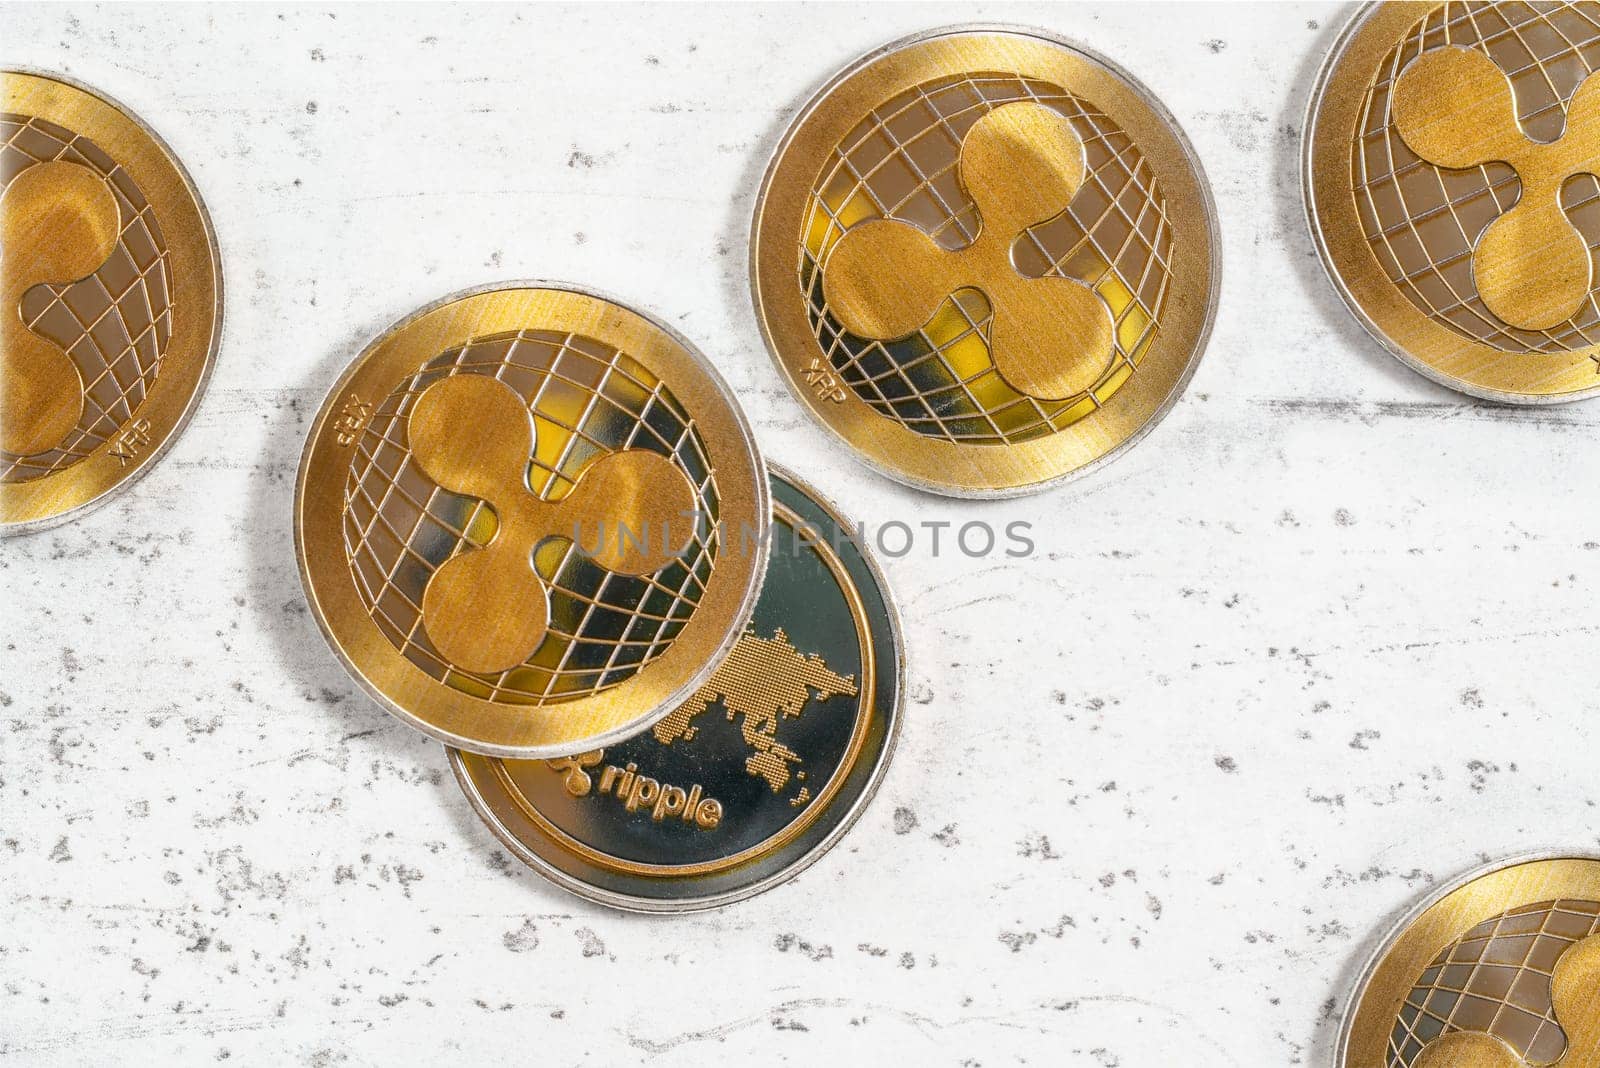 Top down view - XRP ripple cryptocurrency  golden coins on white stone like board
